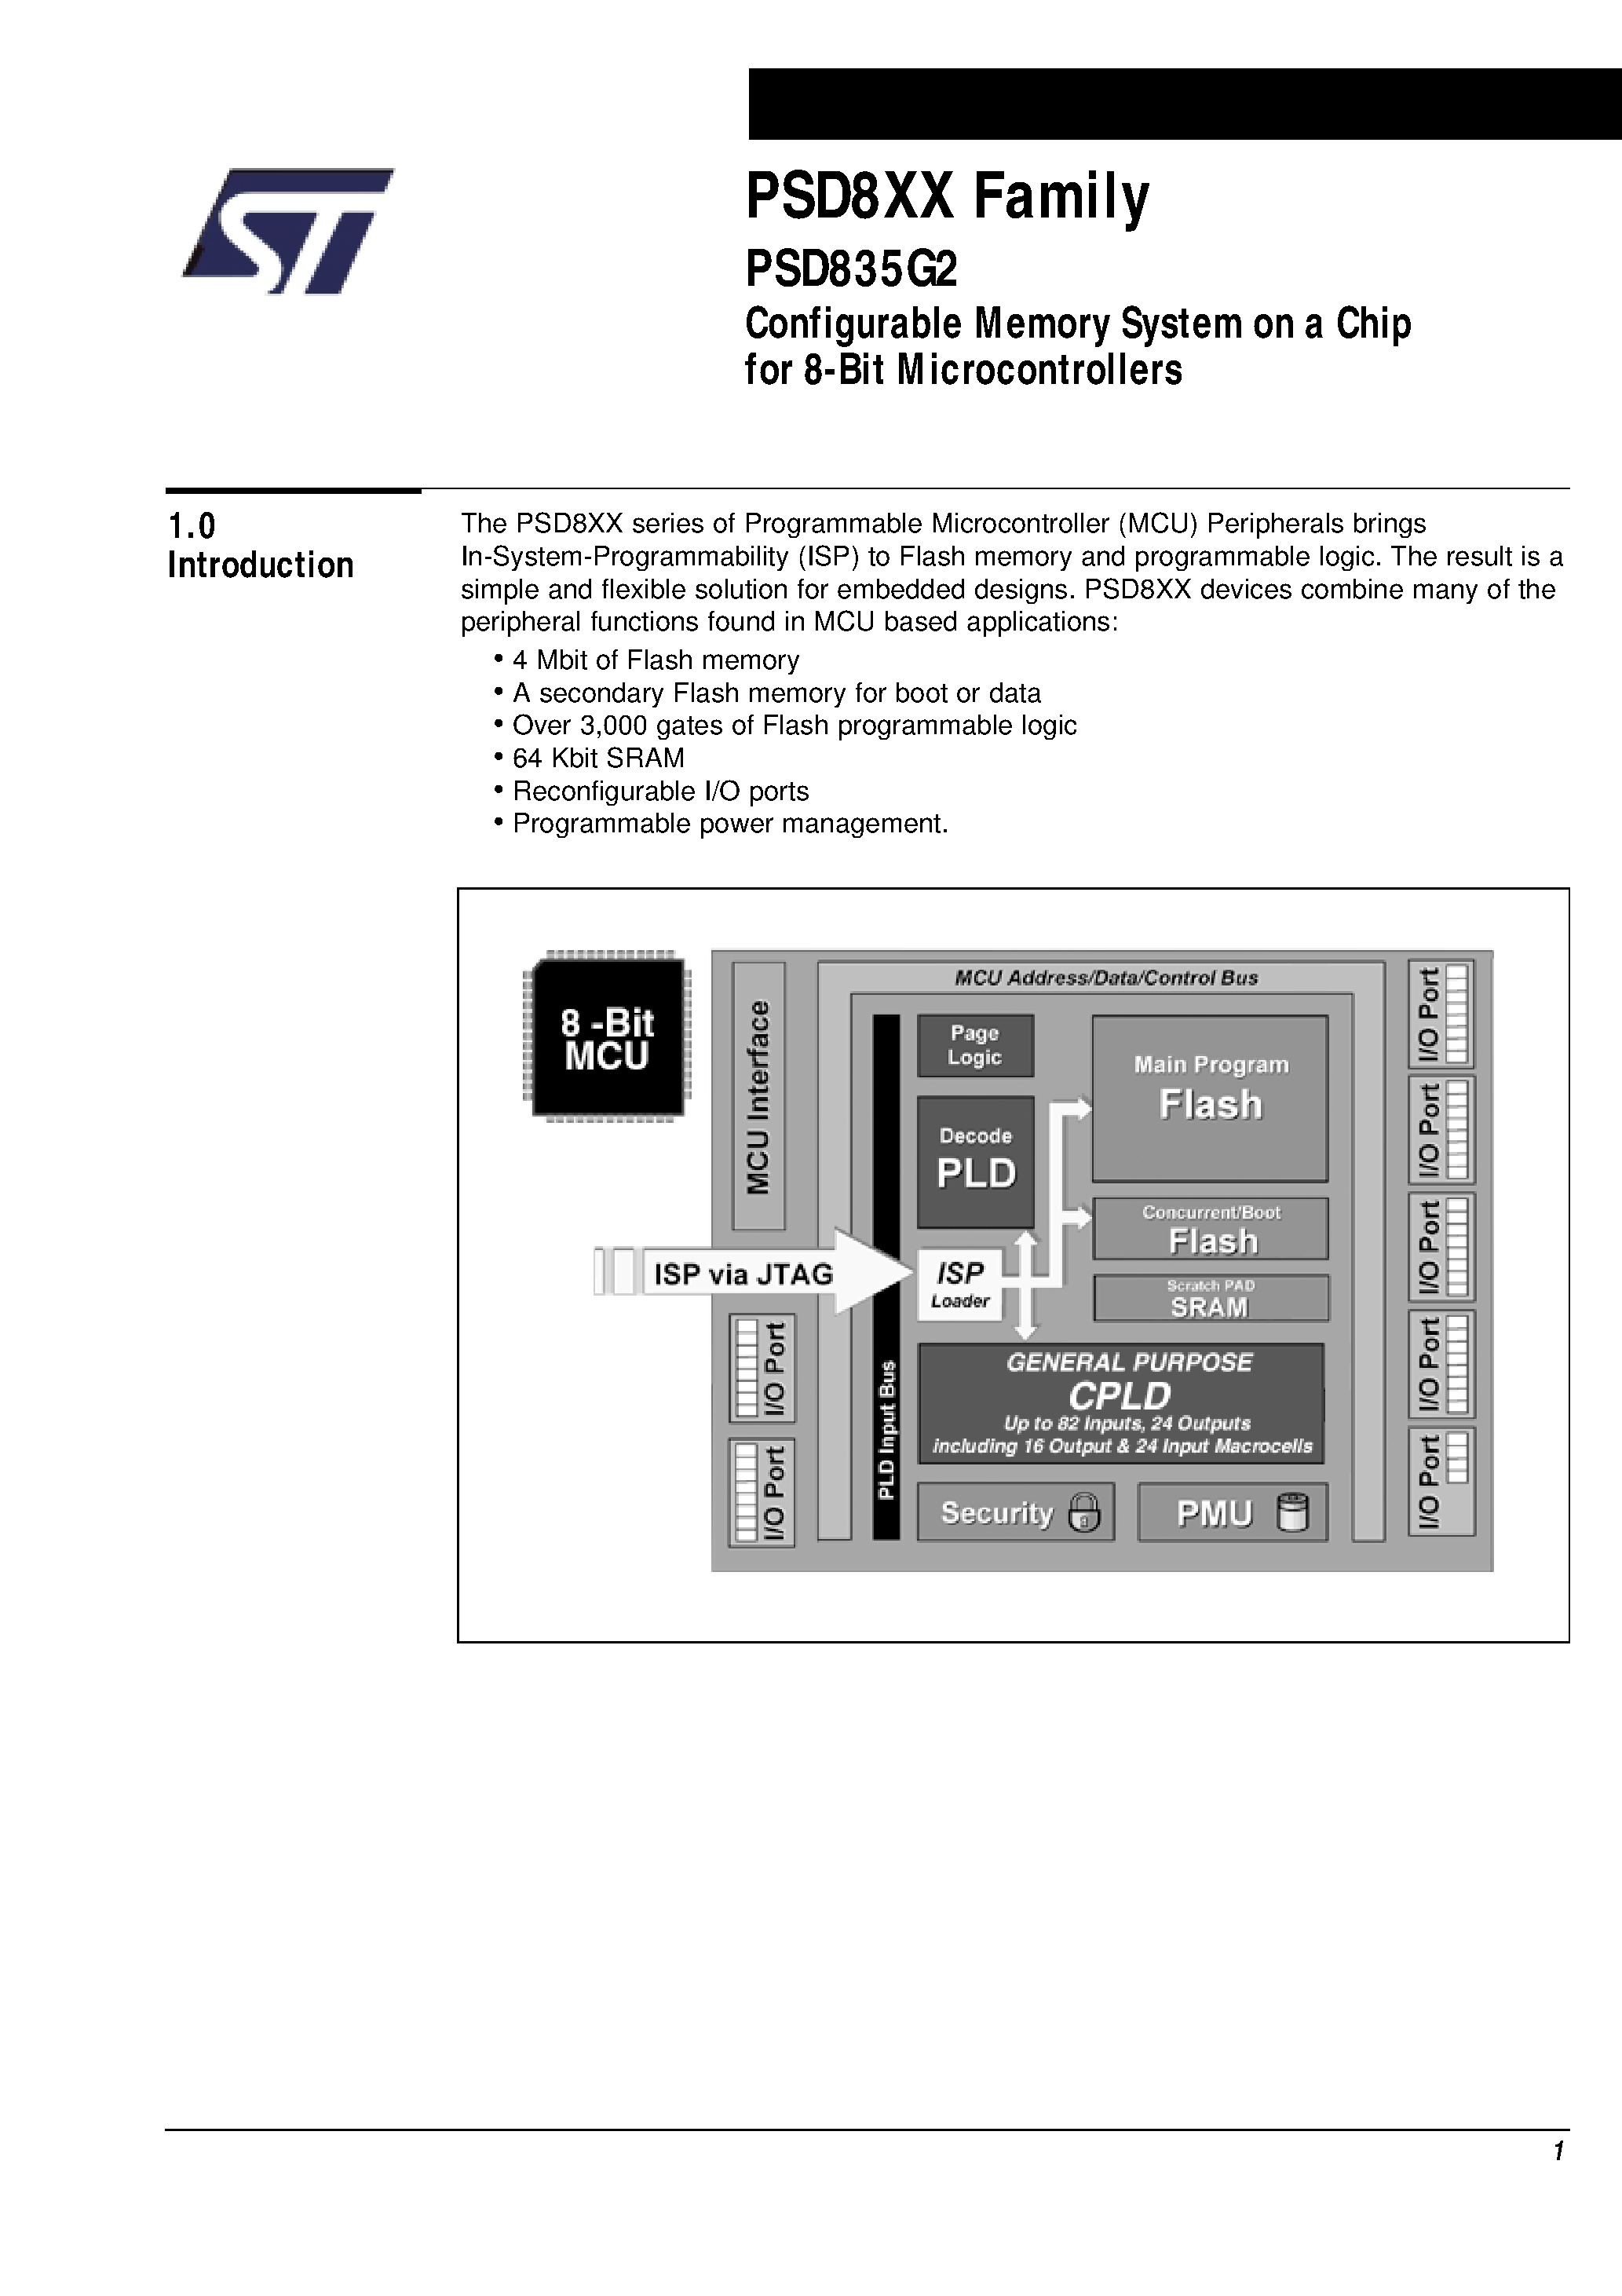 Datasheet PSD835F2-A-15UI - Configurable Memory System on a Chip for 8-Bit Microcontrollers page 2